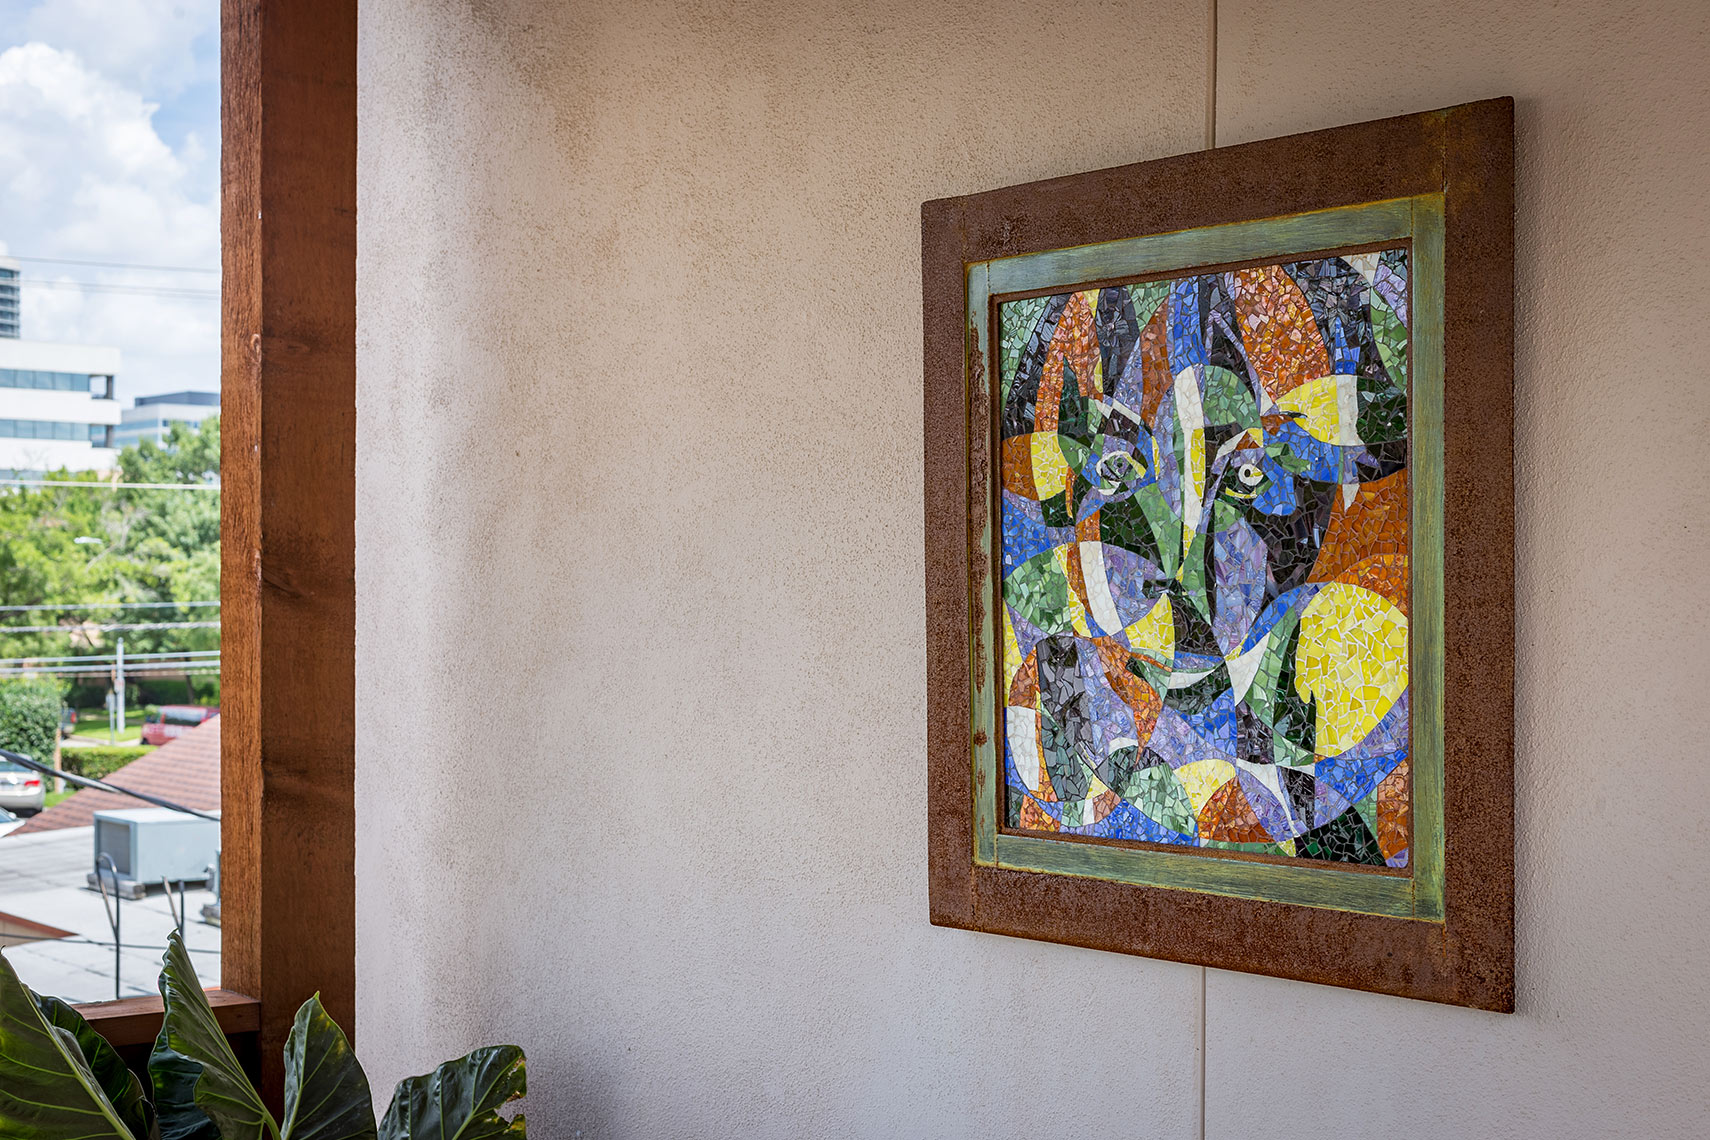 Jonathan-Brown-mosaic-artwork-project-Houston-architectural-photography